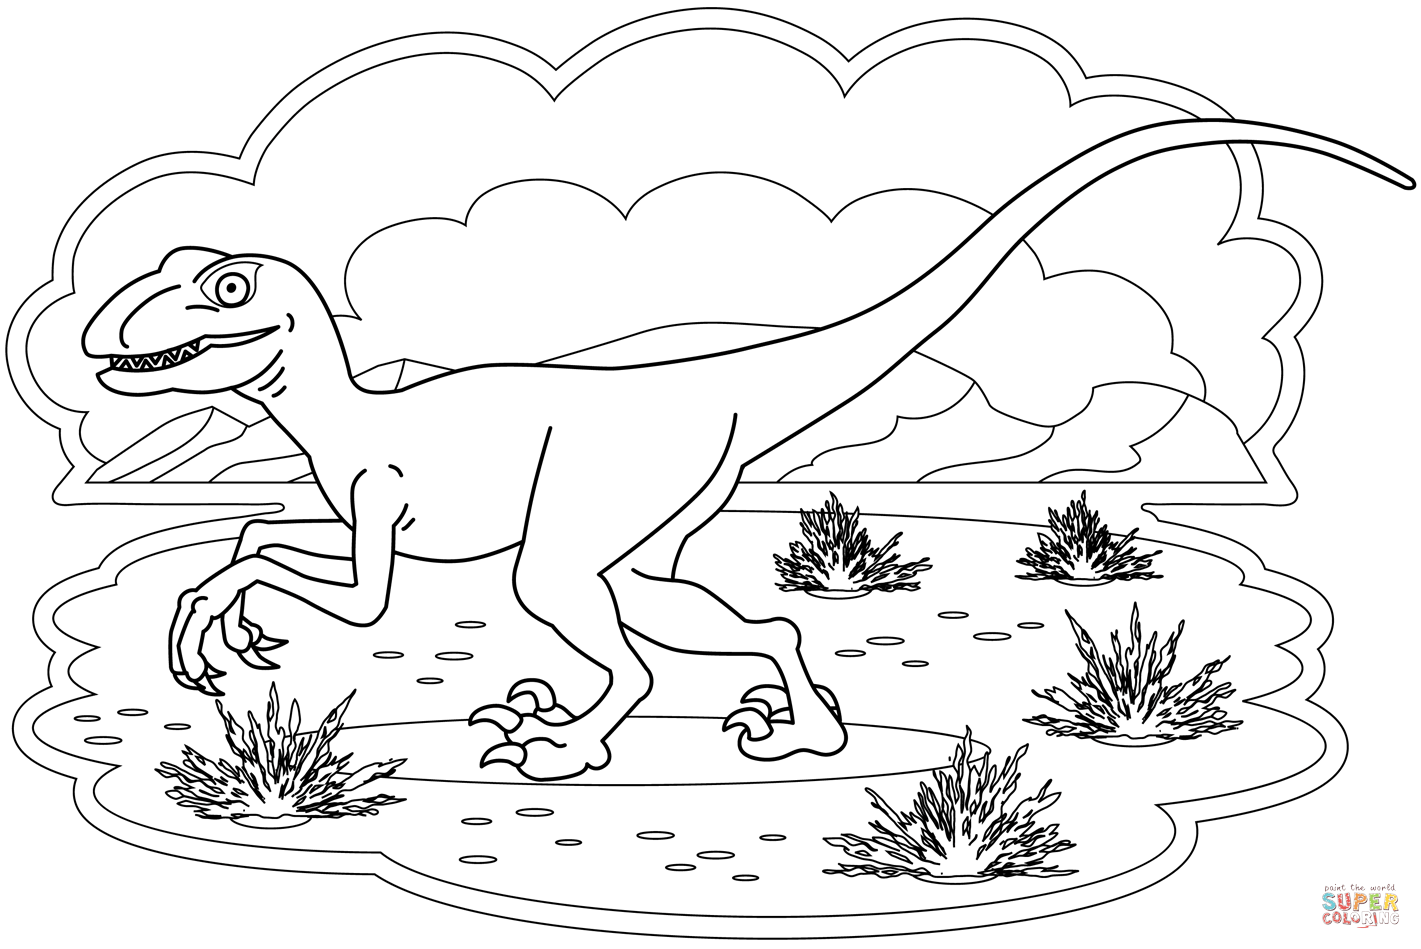 Velociraptor coloring page free printable coloring pages